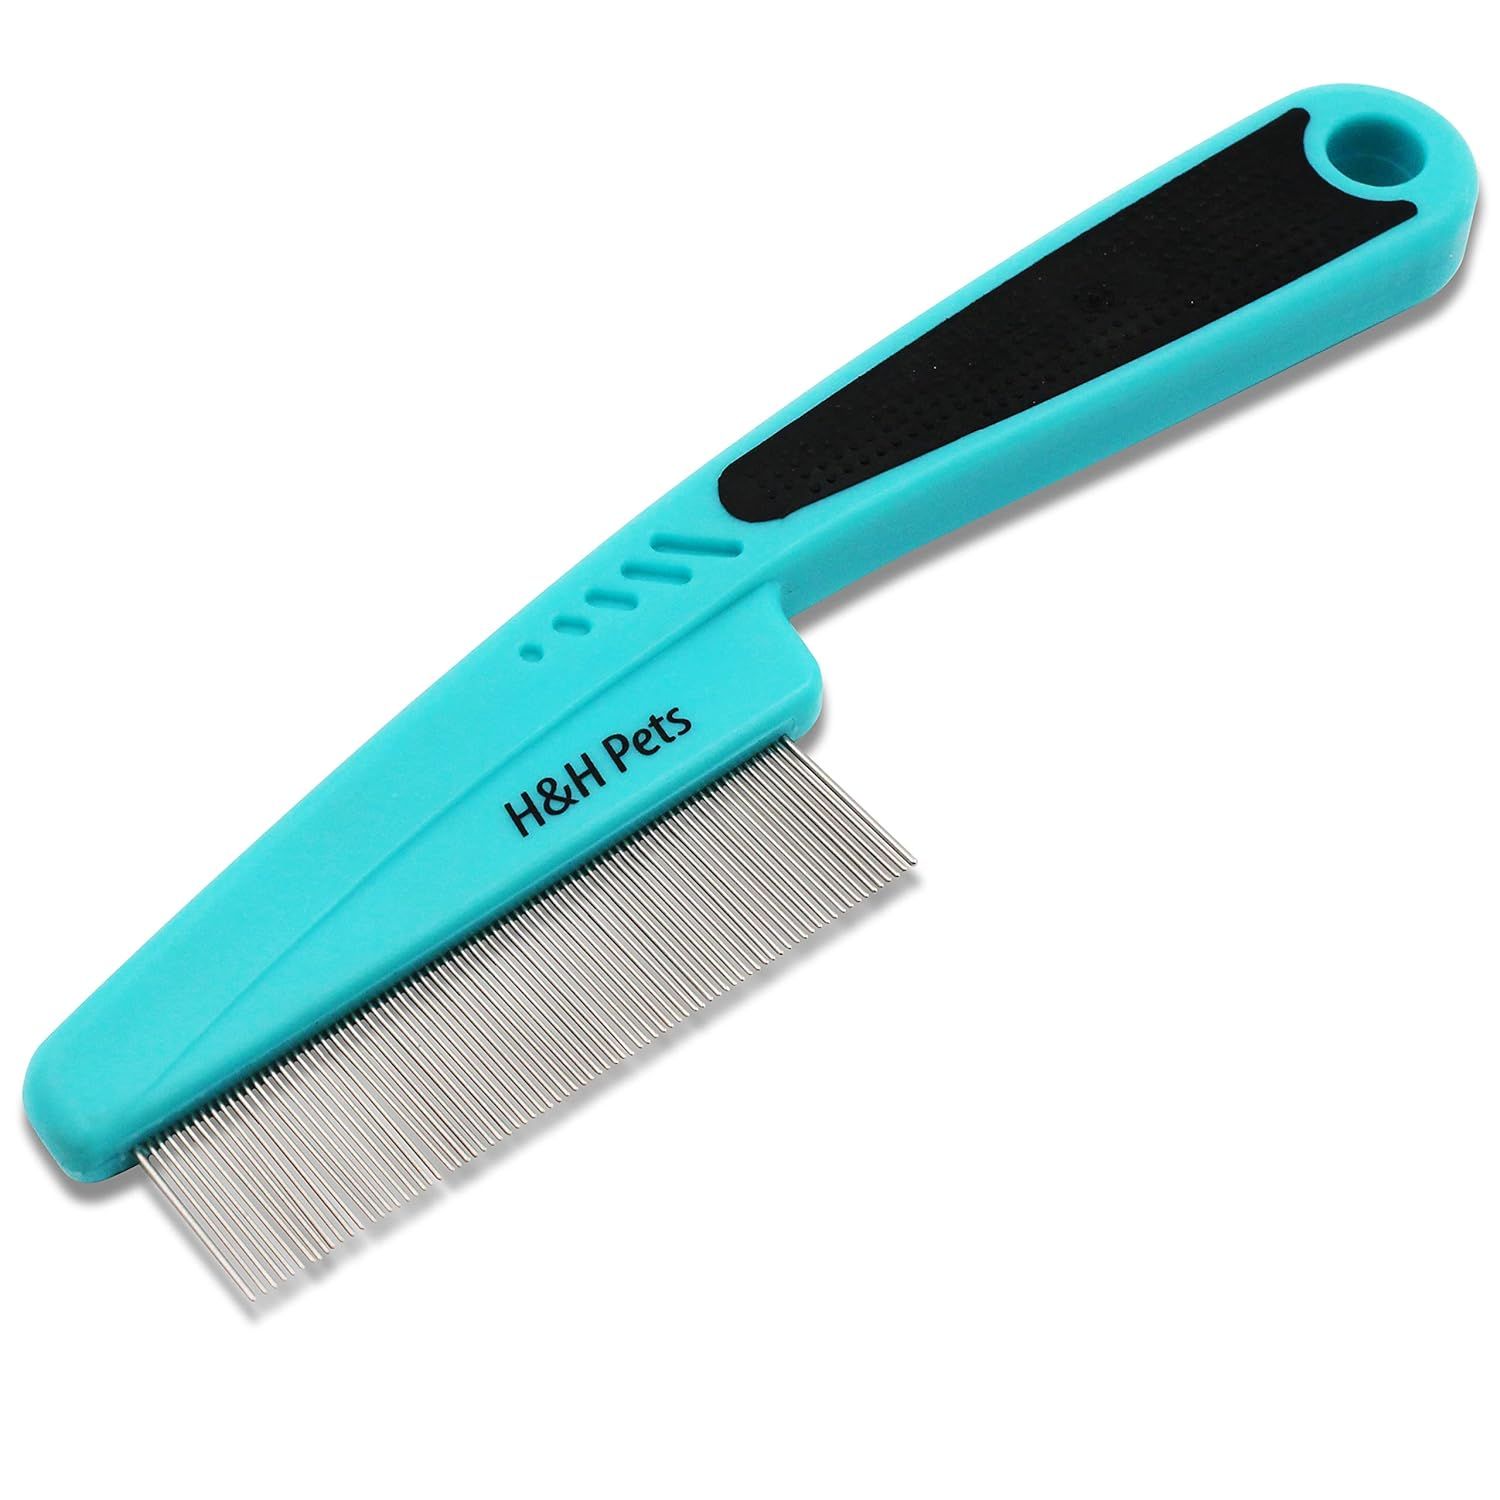 10 Best Flea Combs for Dogs and Cats